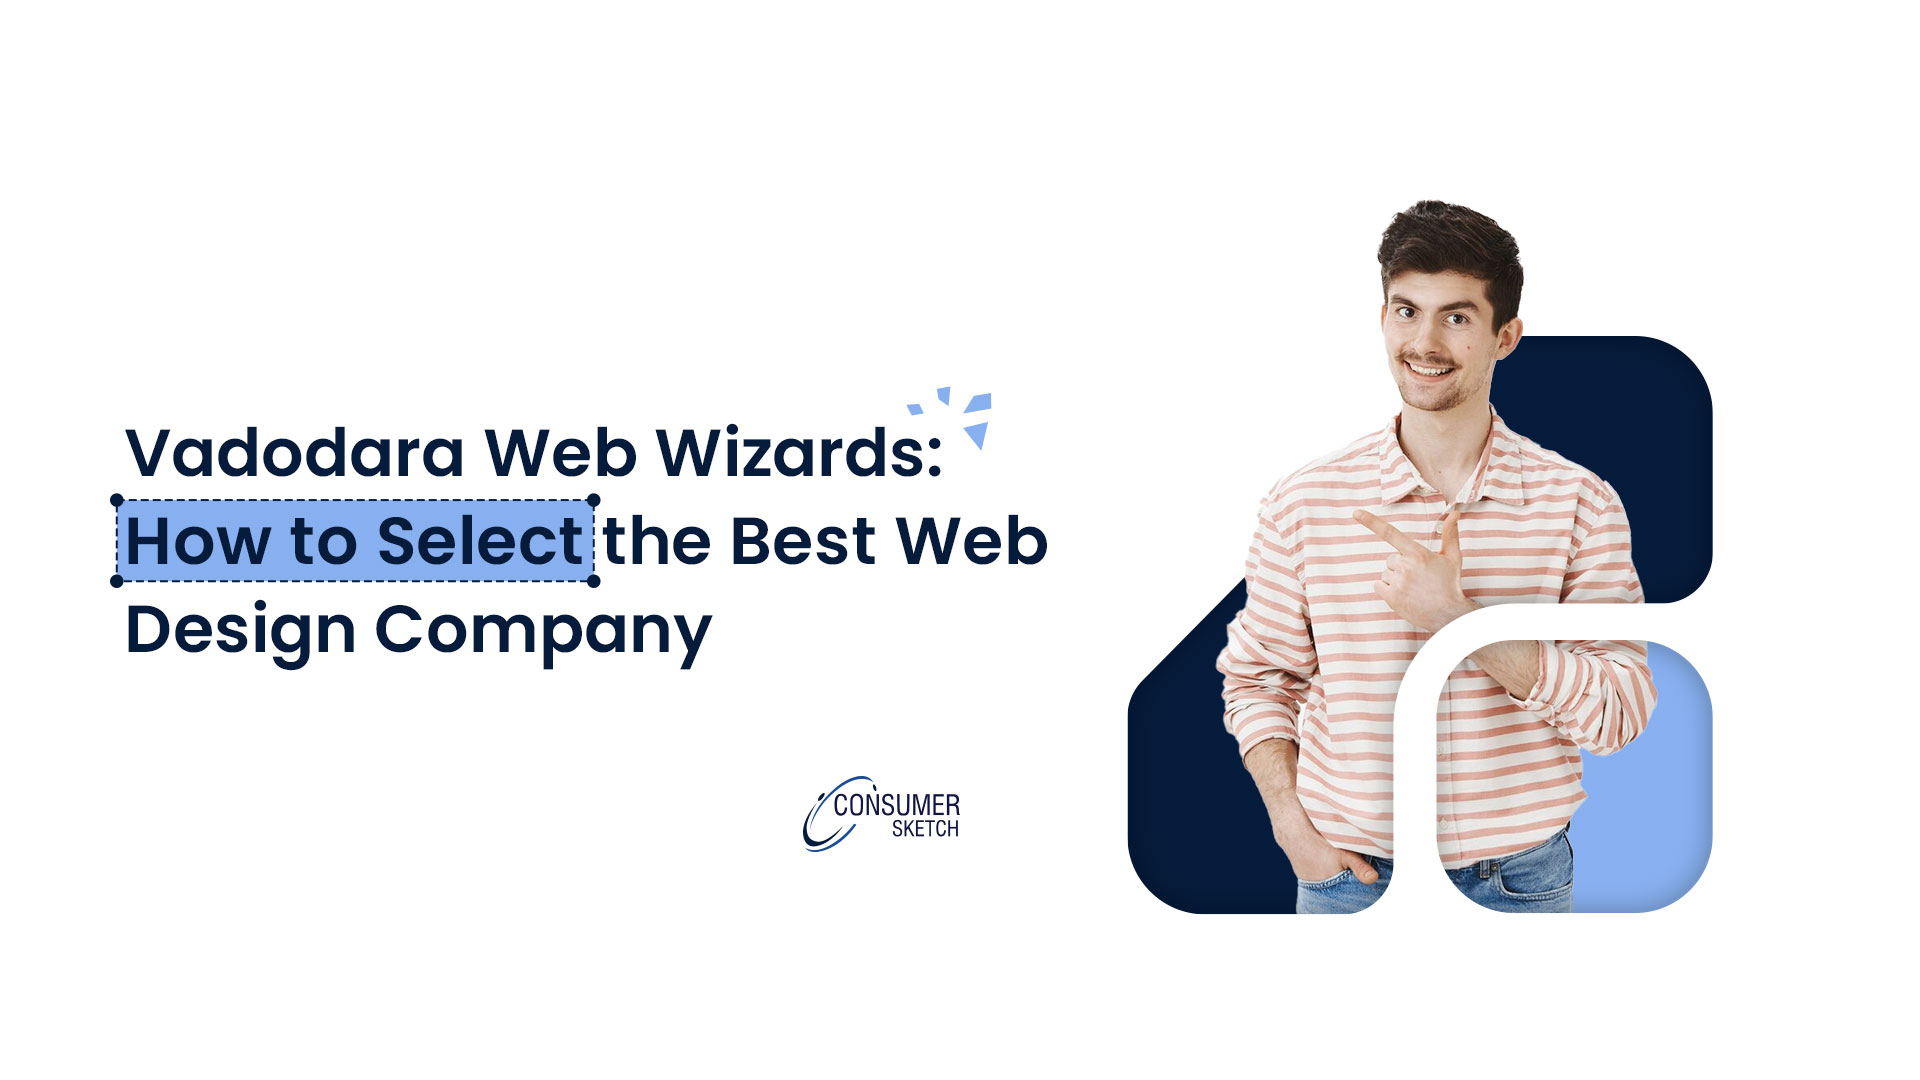 Vadodara Web Wizards: How to Select the Best Web Design Company